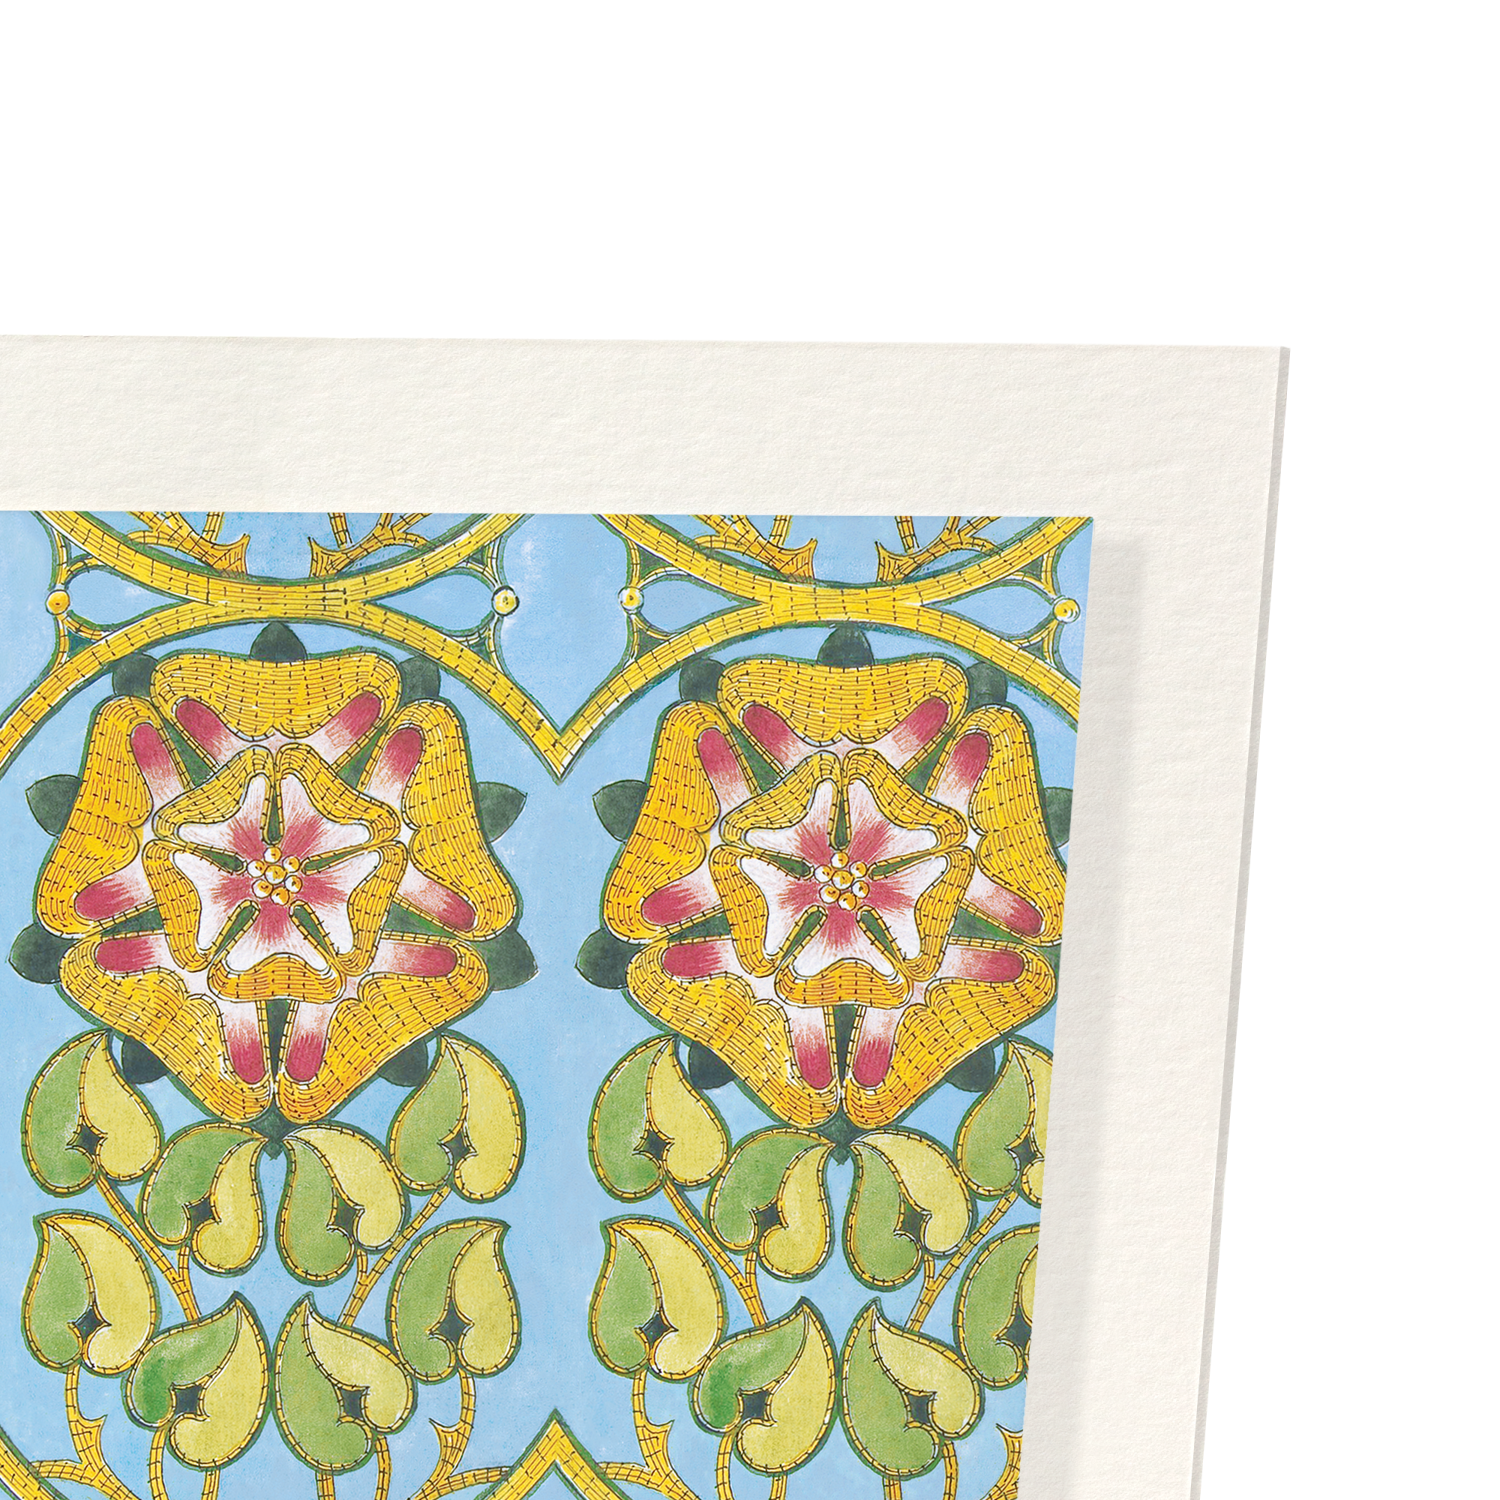 DESIGN FOR ECCLESIASTICAL EMBROIDERY